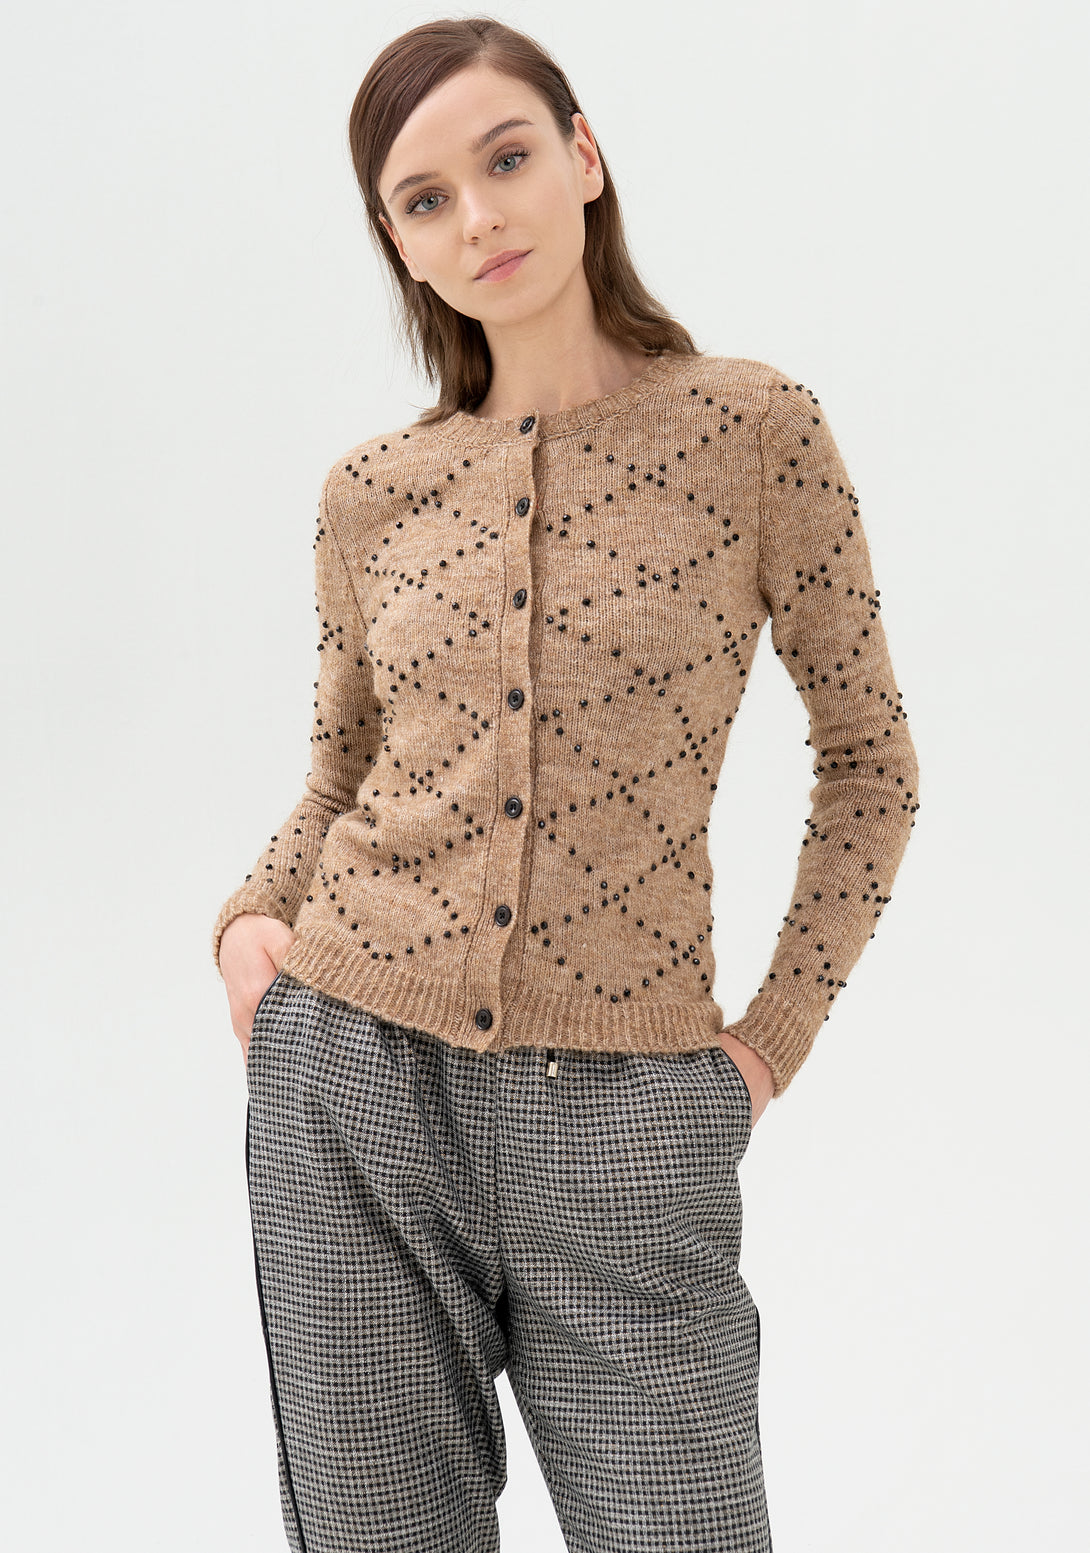 Cardigan tight fit with a diamond shape pattern made with shiny pearls